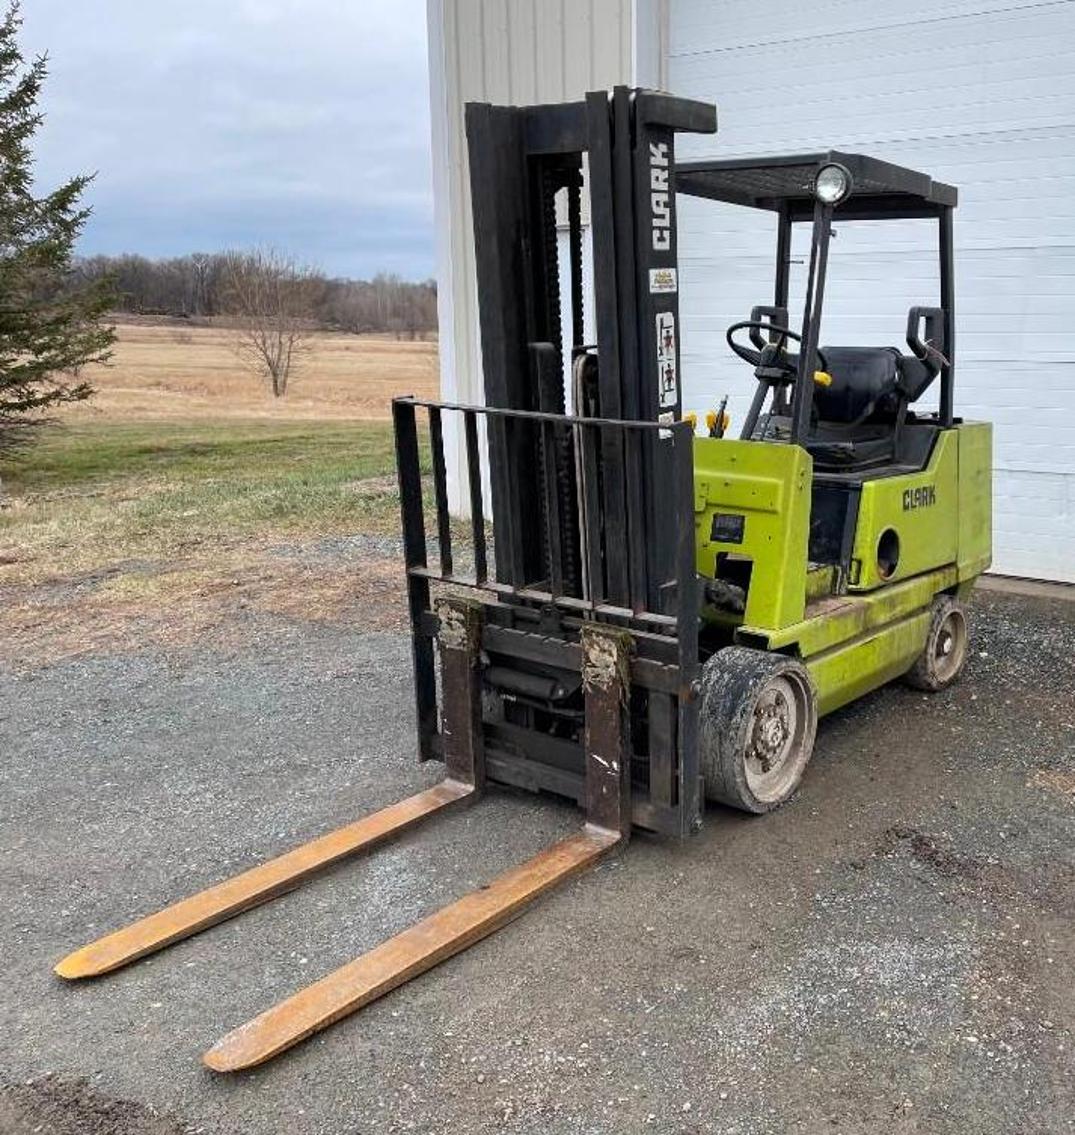 Skid Loader Attachments, Clark Forklift, New Tool Benches & Tools